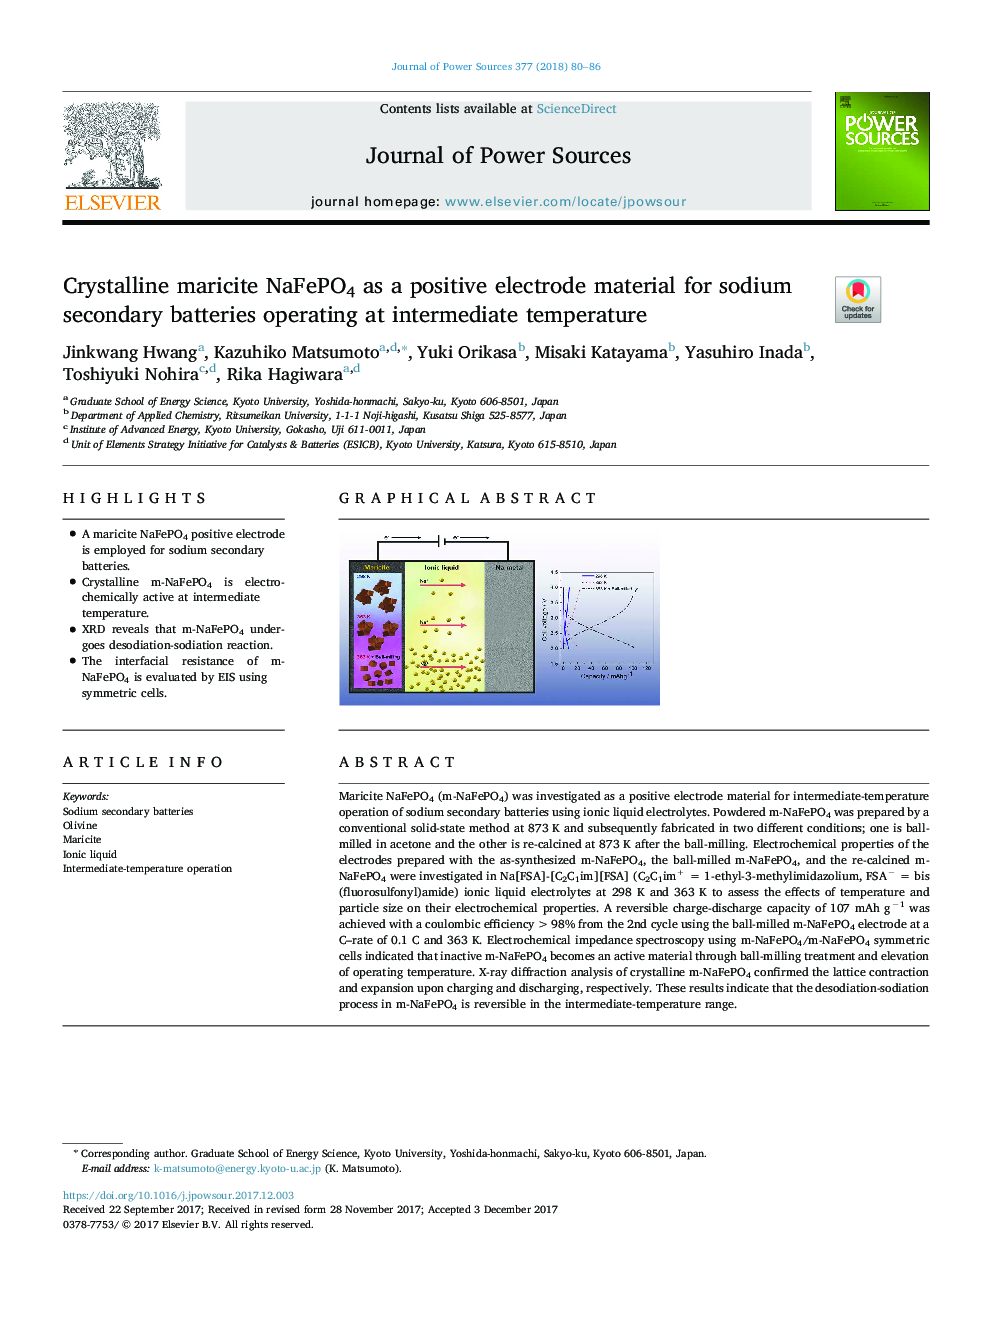 Crystalline maricite NaFePO4 as a positive electrode material for sodium secondary batteries operating at intermediate temperature